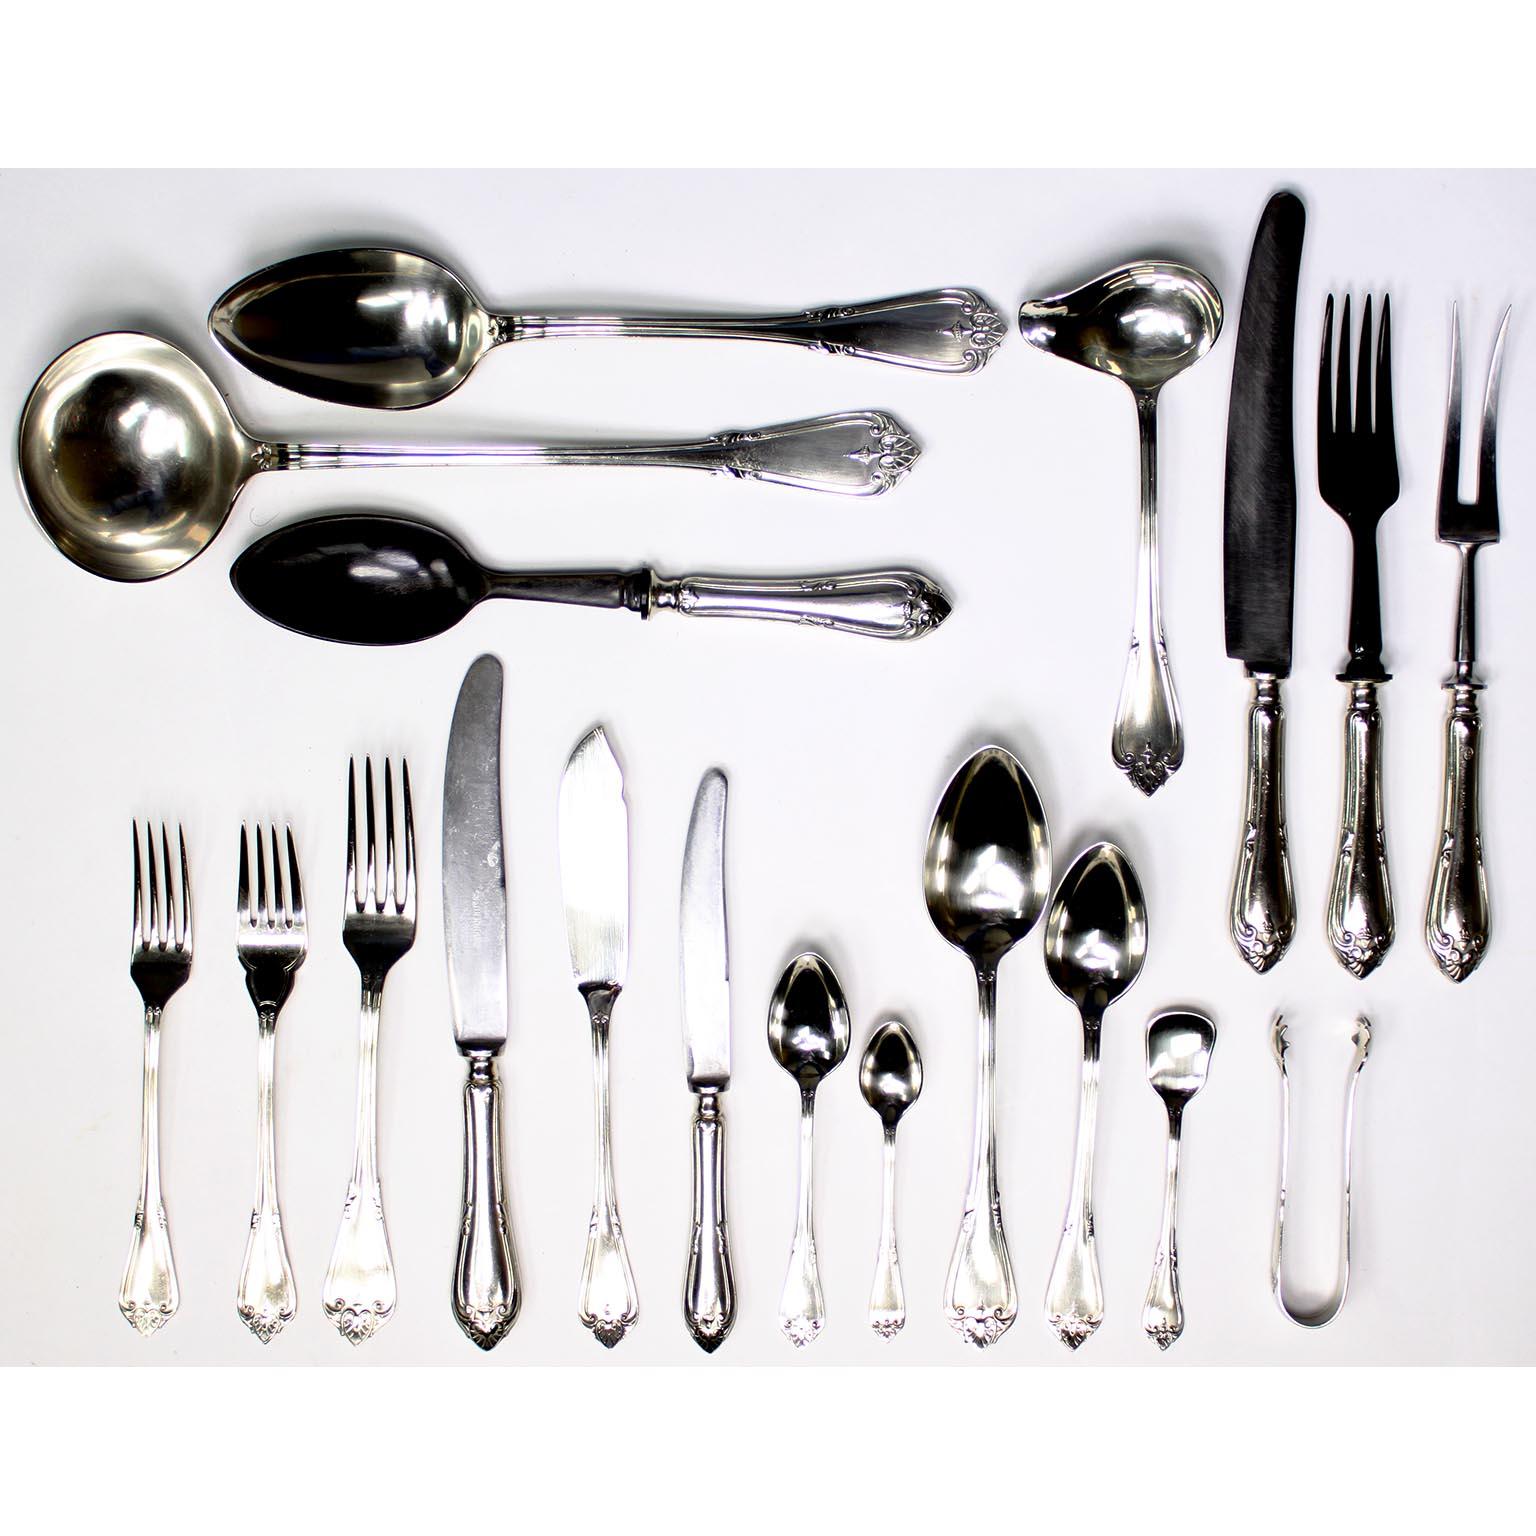 A Fine Early 20th Century 152 Piece Austrian Dinnerware Flatware Set by Berndorfer Metallwaaren-Fabrik, stamped 'Berndorf Alpacca', The Neoclassical Revival style set of Alpacca flatware comprising of: 

12 Fish knives
12 Salad forks
12 Salad